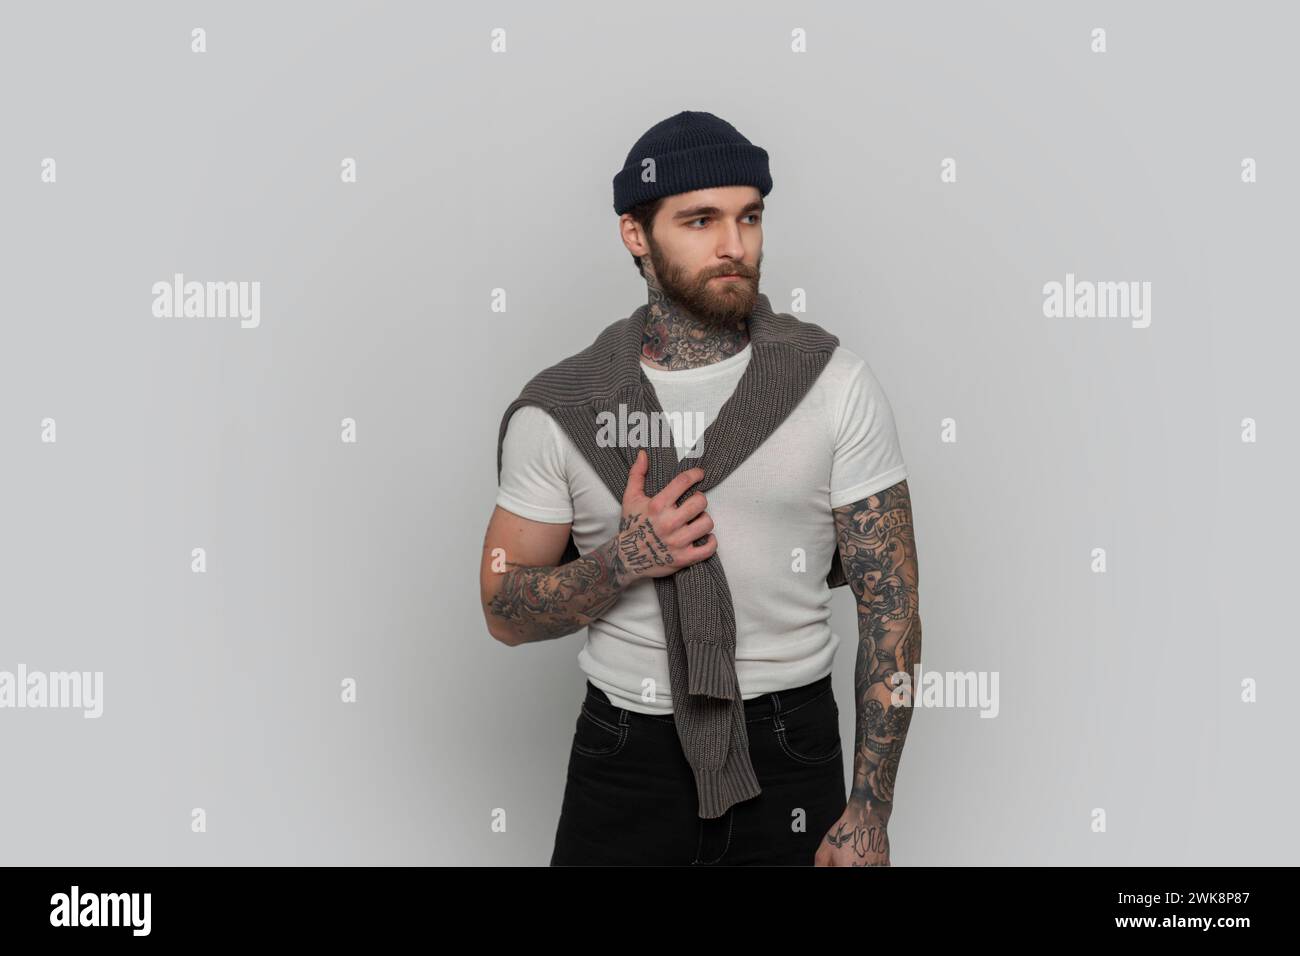 Cool Hipster Man With Tattoo With Hairstyle And Beard In A Fashionable White T-shirt And Knitted Sweater In The Studio Stock Photo